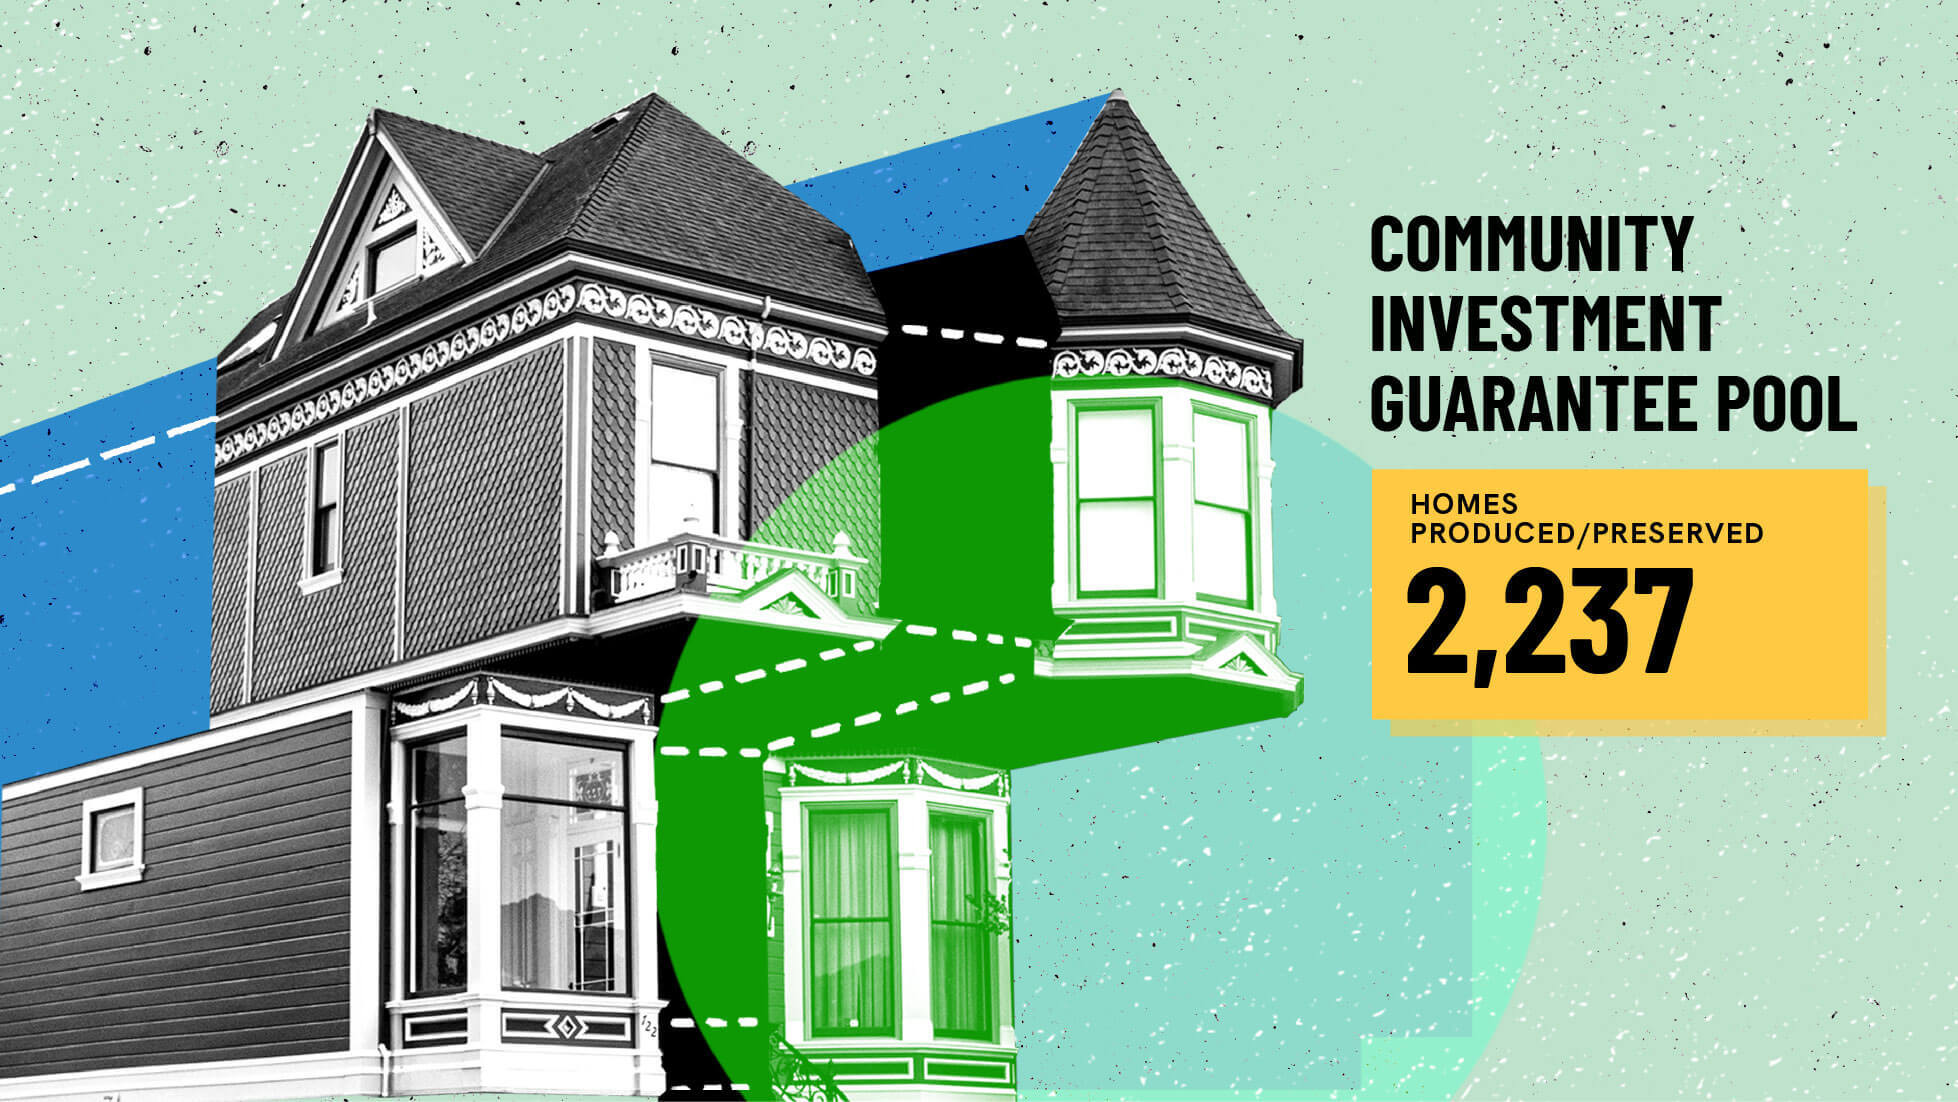 CZI's partnership with Community Investment Guarantee Pool produced or preserved 2,237 homes.